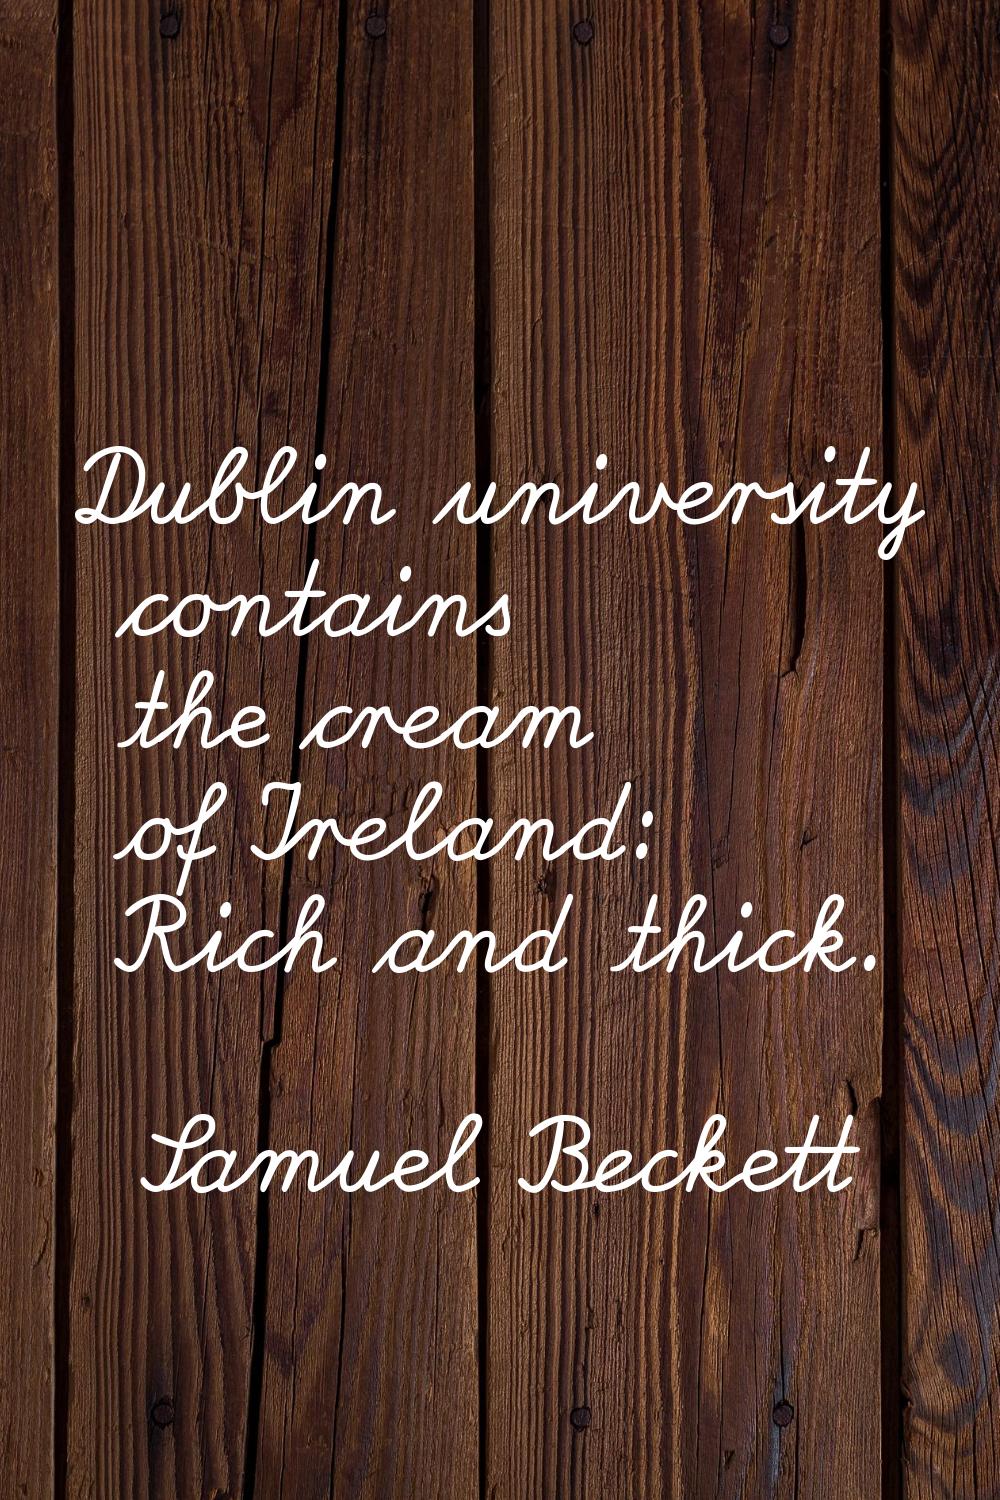 Dublin university contains the cream of Ireland: Rich and thick.